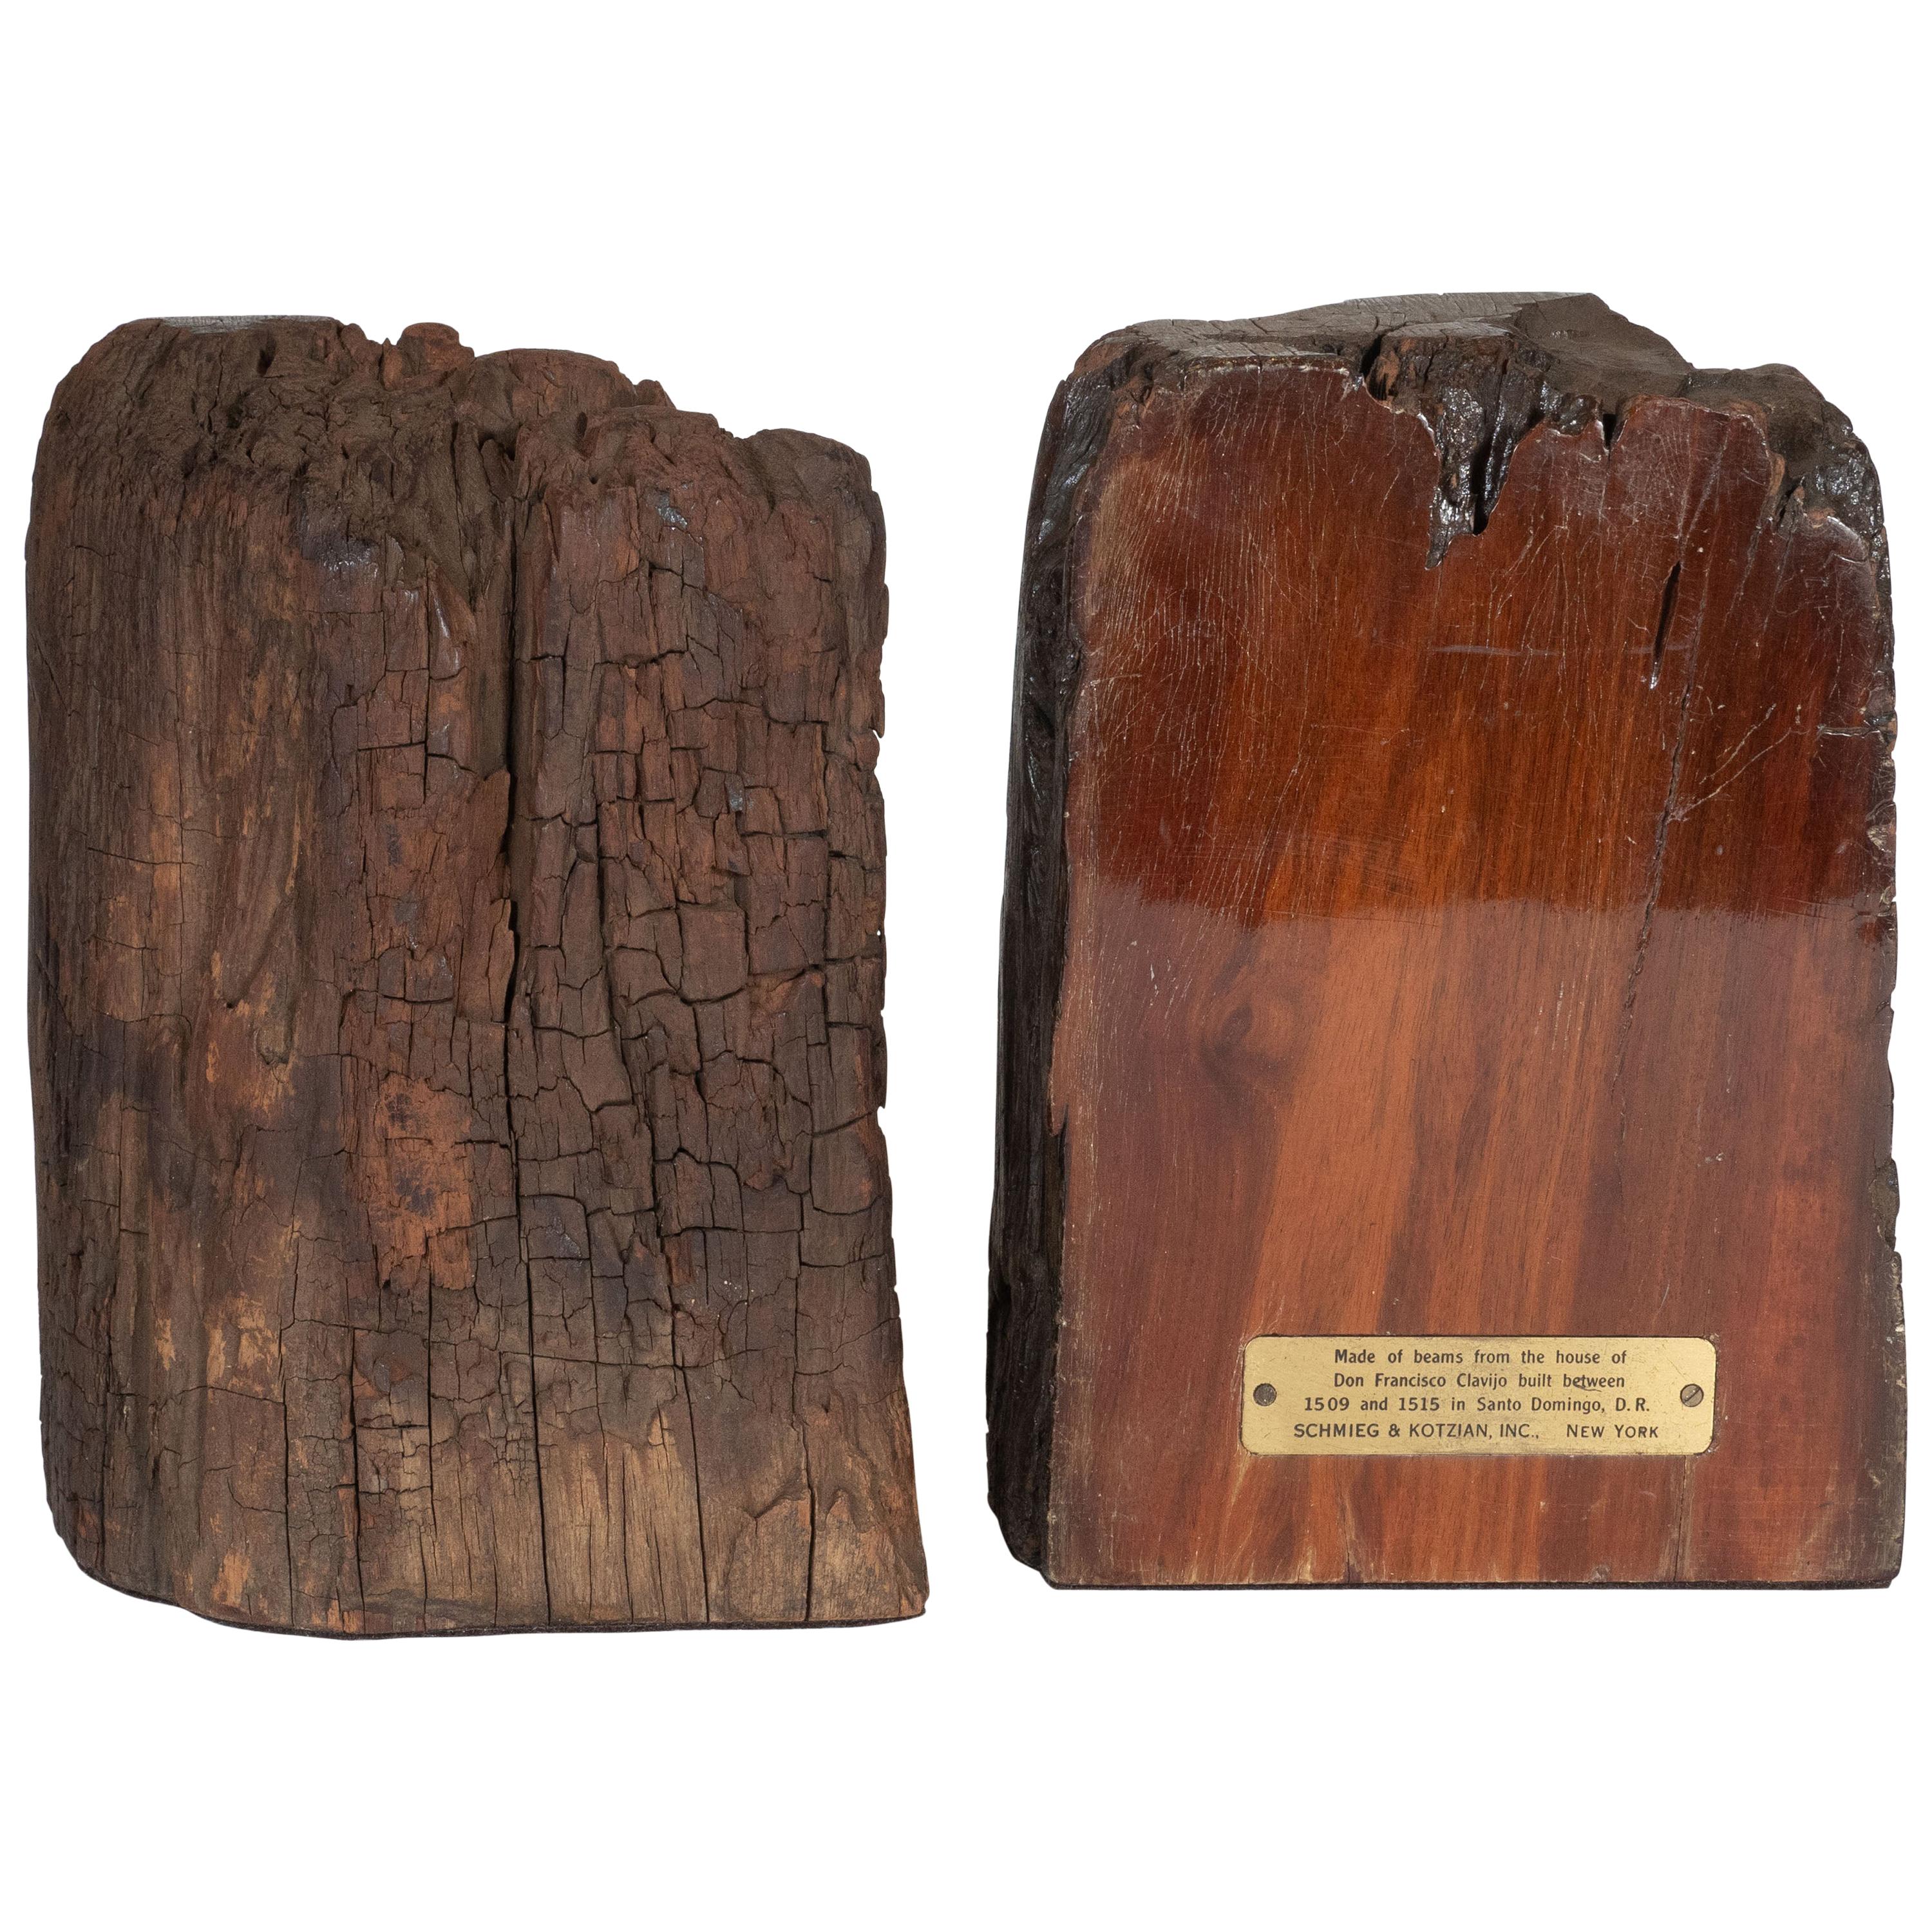 Midcentury Organic Schmieg & Kotzian Caobo Bookends from 16th Century Beams